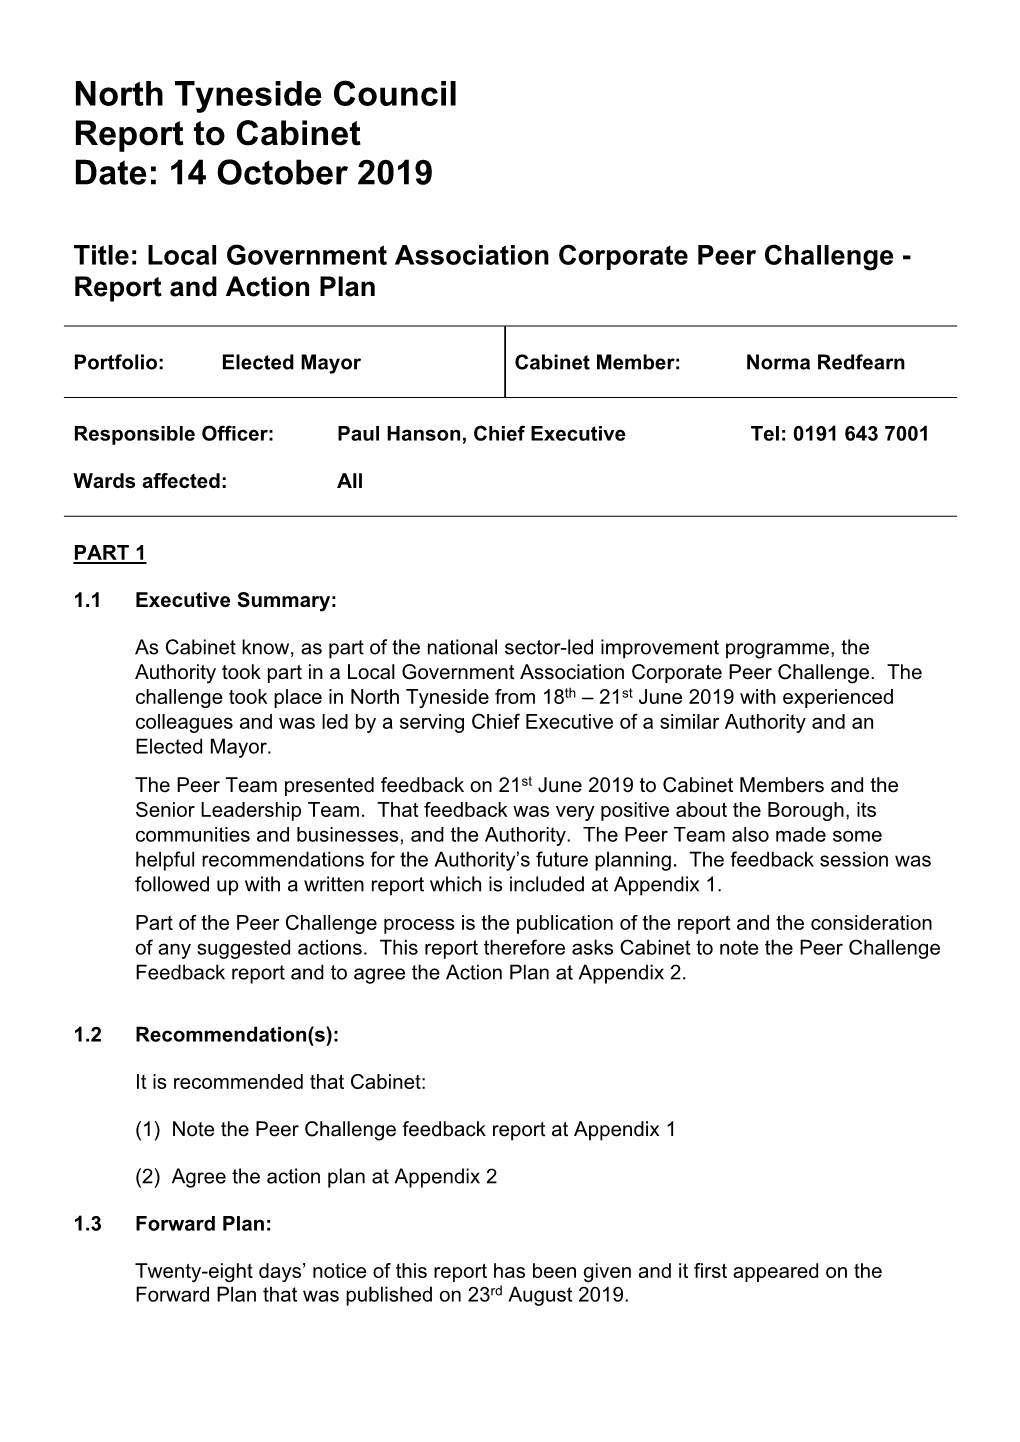 Local Government Association Corporate Peer Challenge - Report and Action Plan